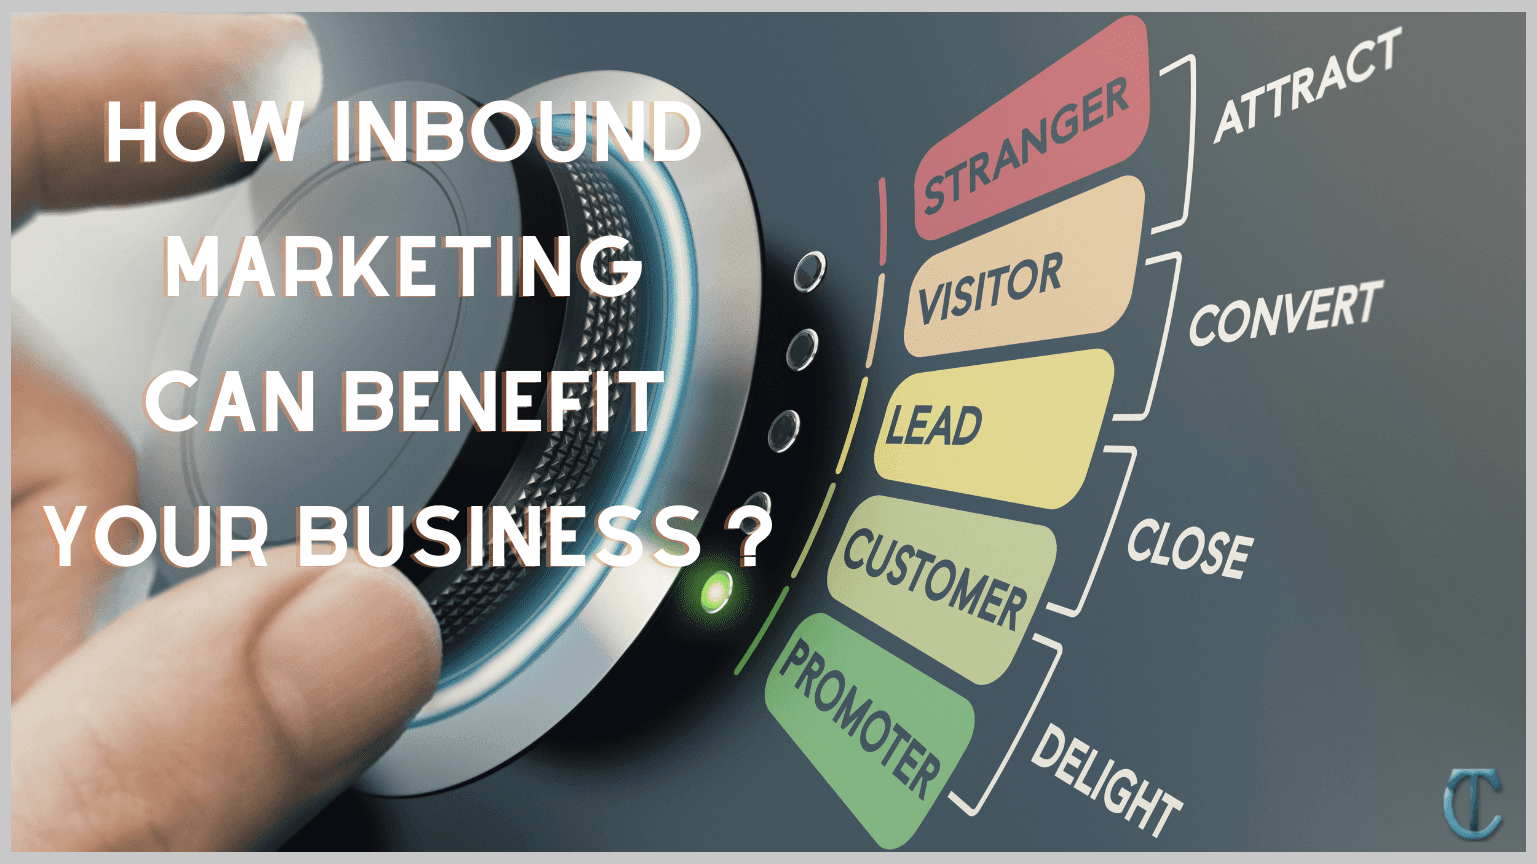 How Inbound Marketing Can Benefit Your Business